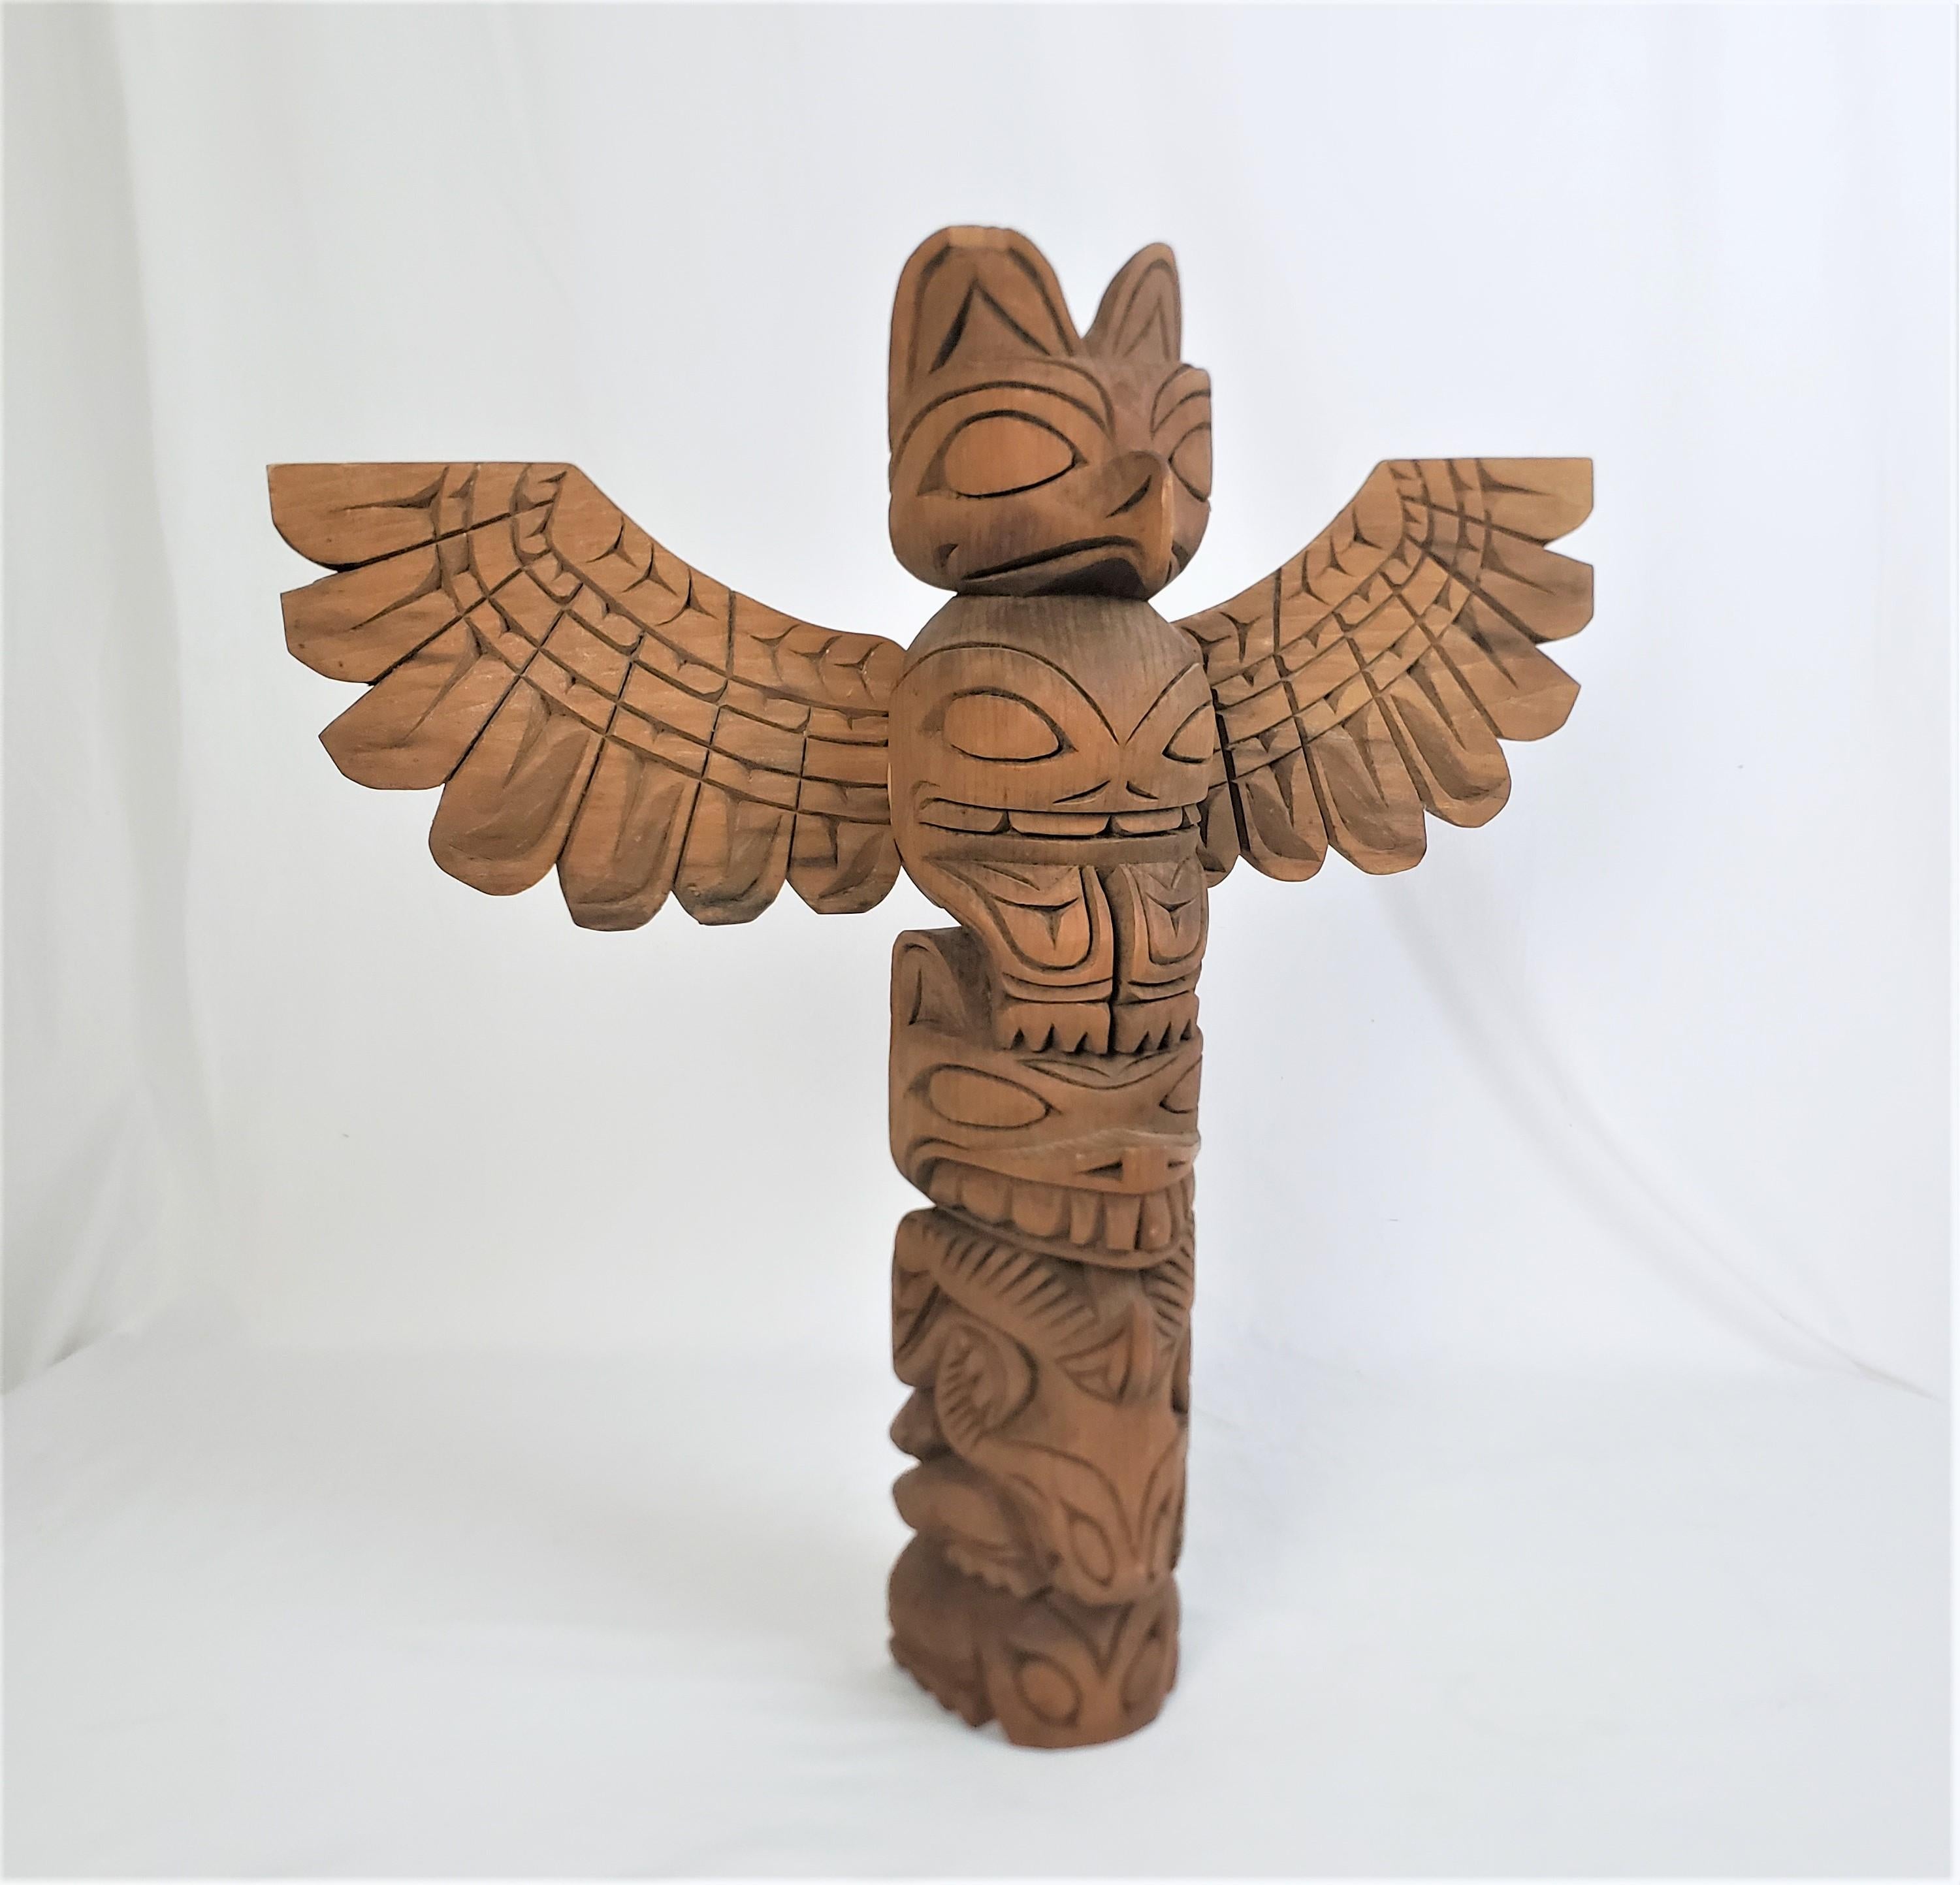 This Indigenous American totem pole was done by the renowned master carver John T. Williams of the United States in approximately 1960 in his signature West Coast Haida style. The sculpture is done in cedar and has hand-carved stylized animals and